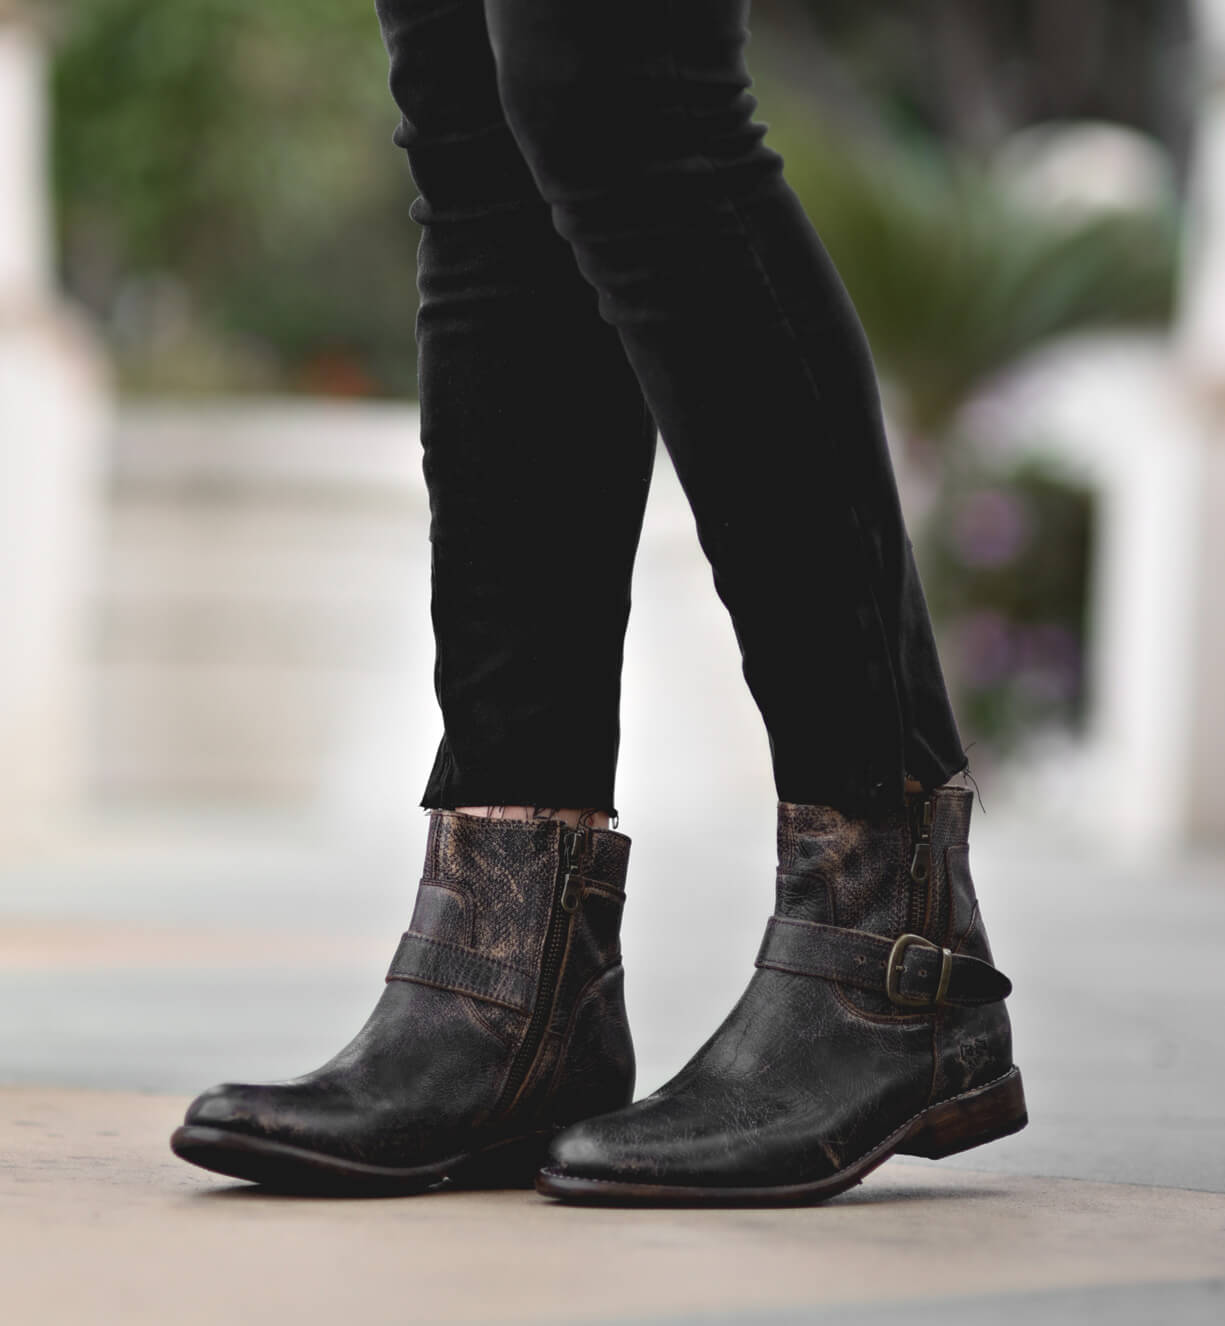 A woman wearing Becca black jeans and Bed Stu black boots.